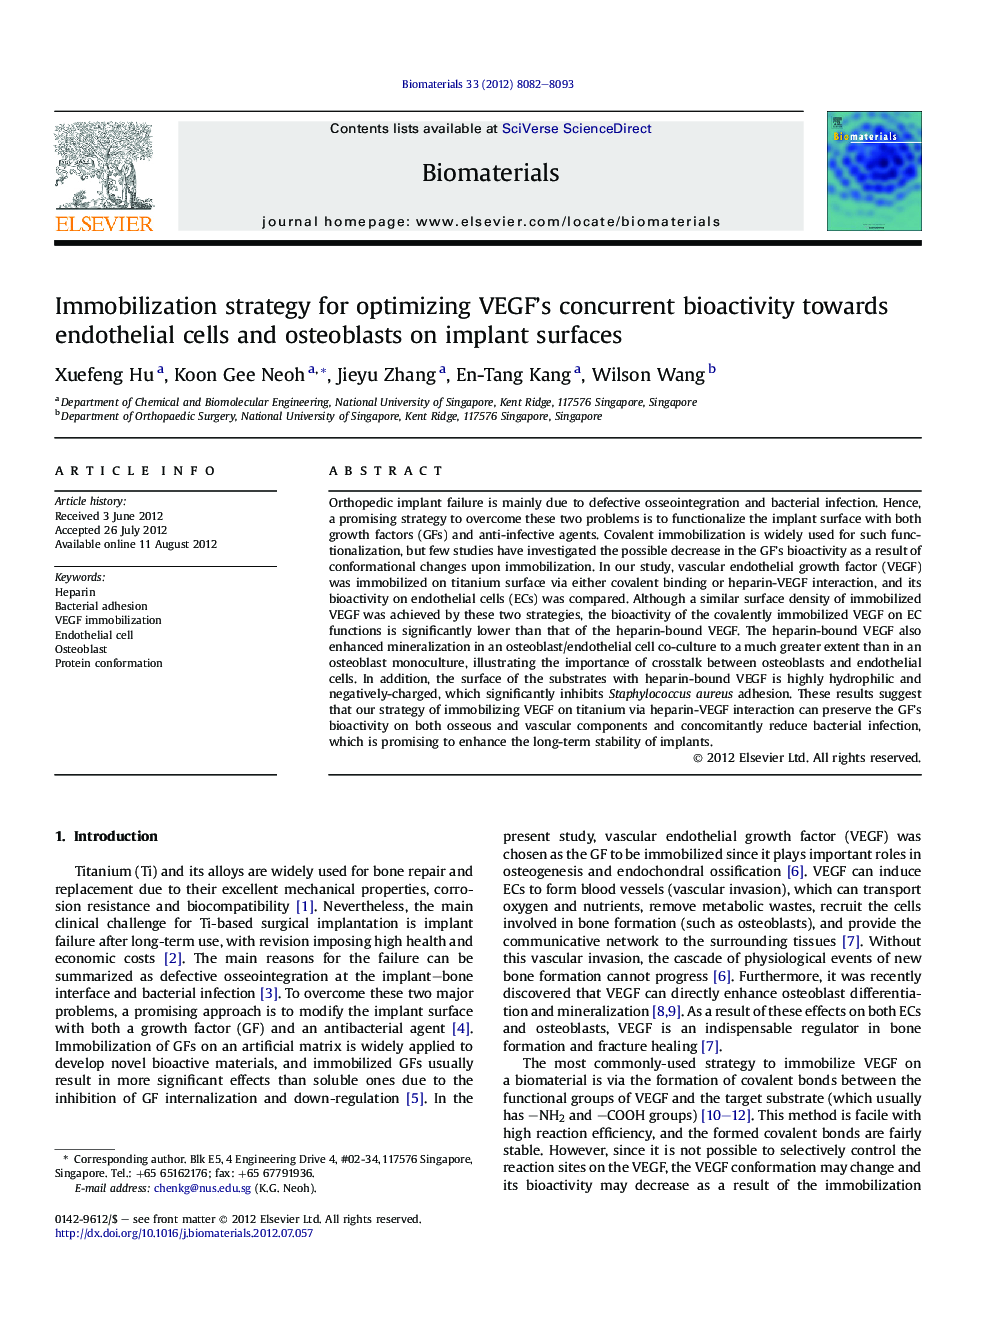 Immobilization strategy for optimizing VEGF's concurrent bioactivity towards endothelial cells and osteoblasts on implant surfaces